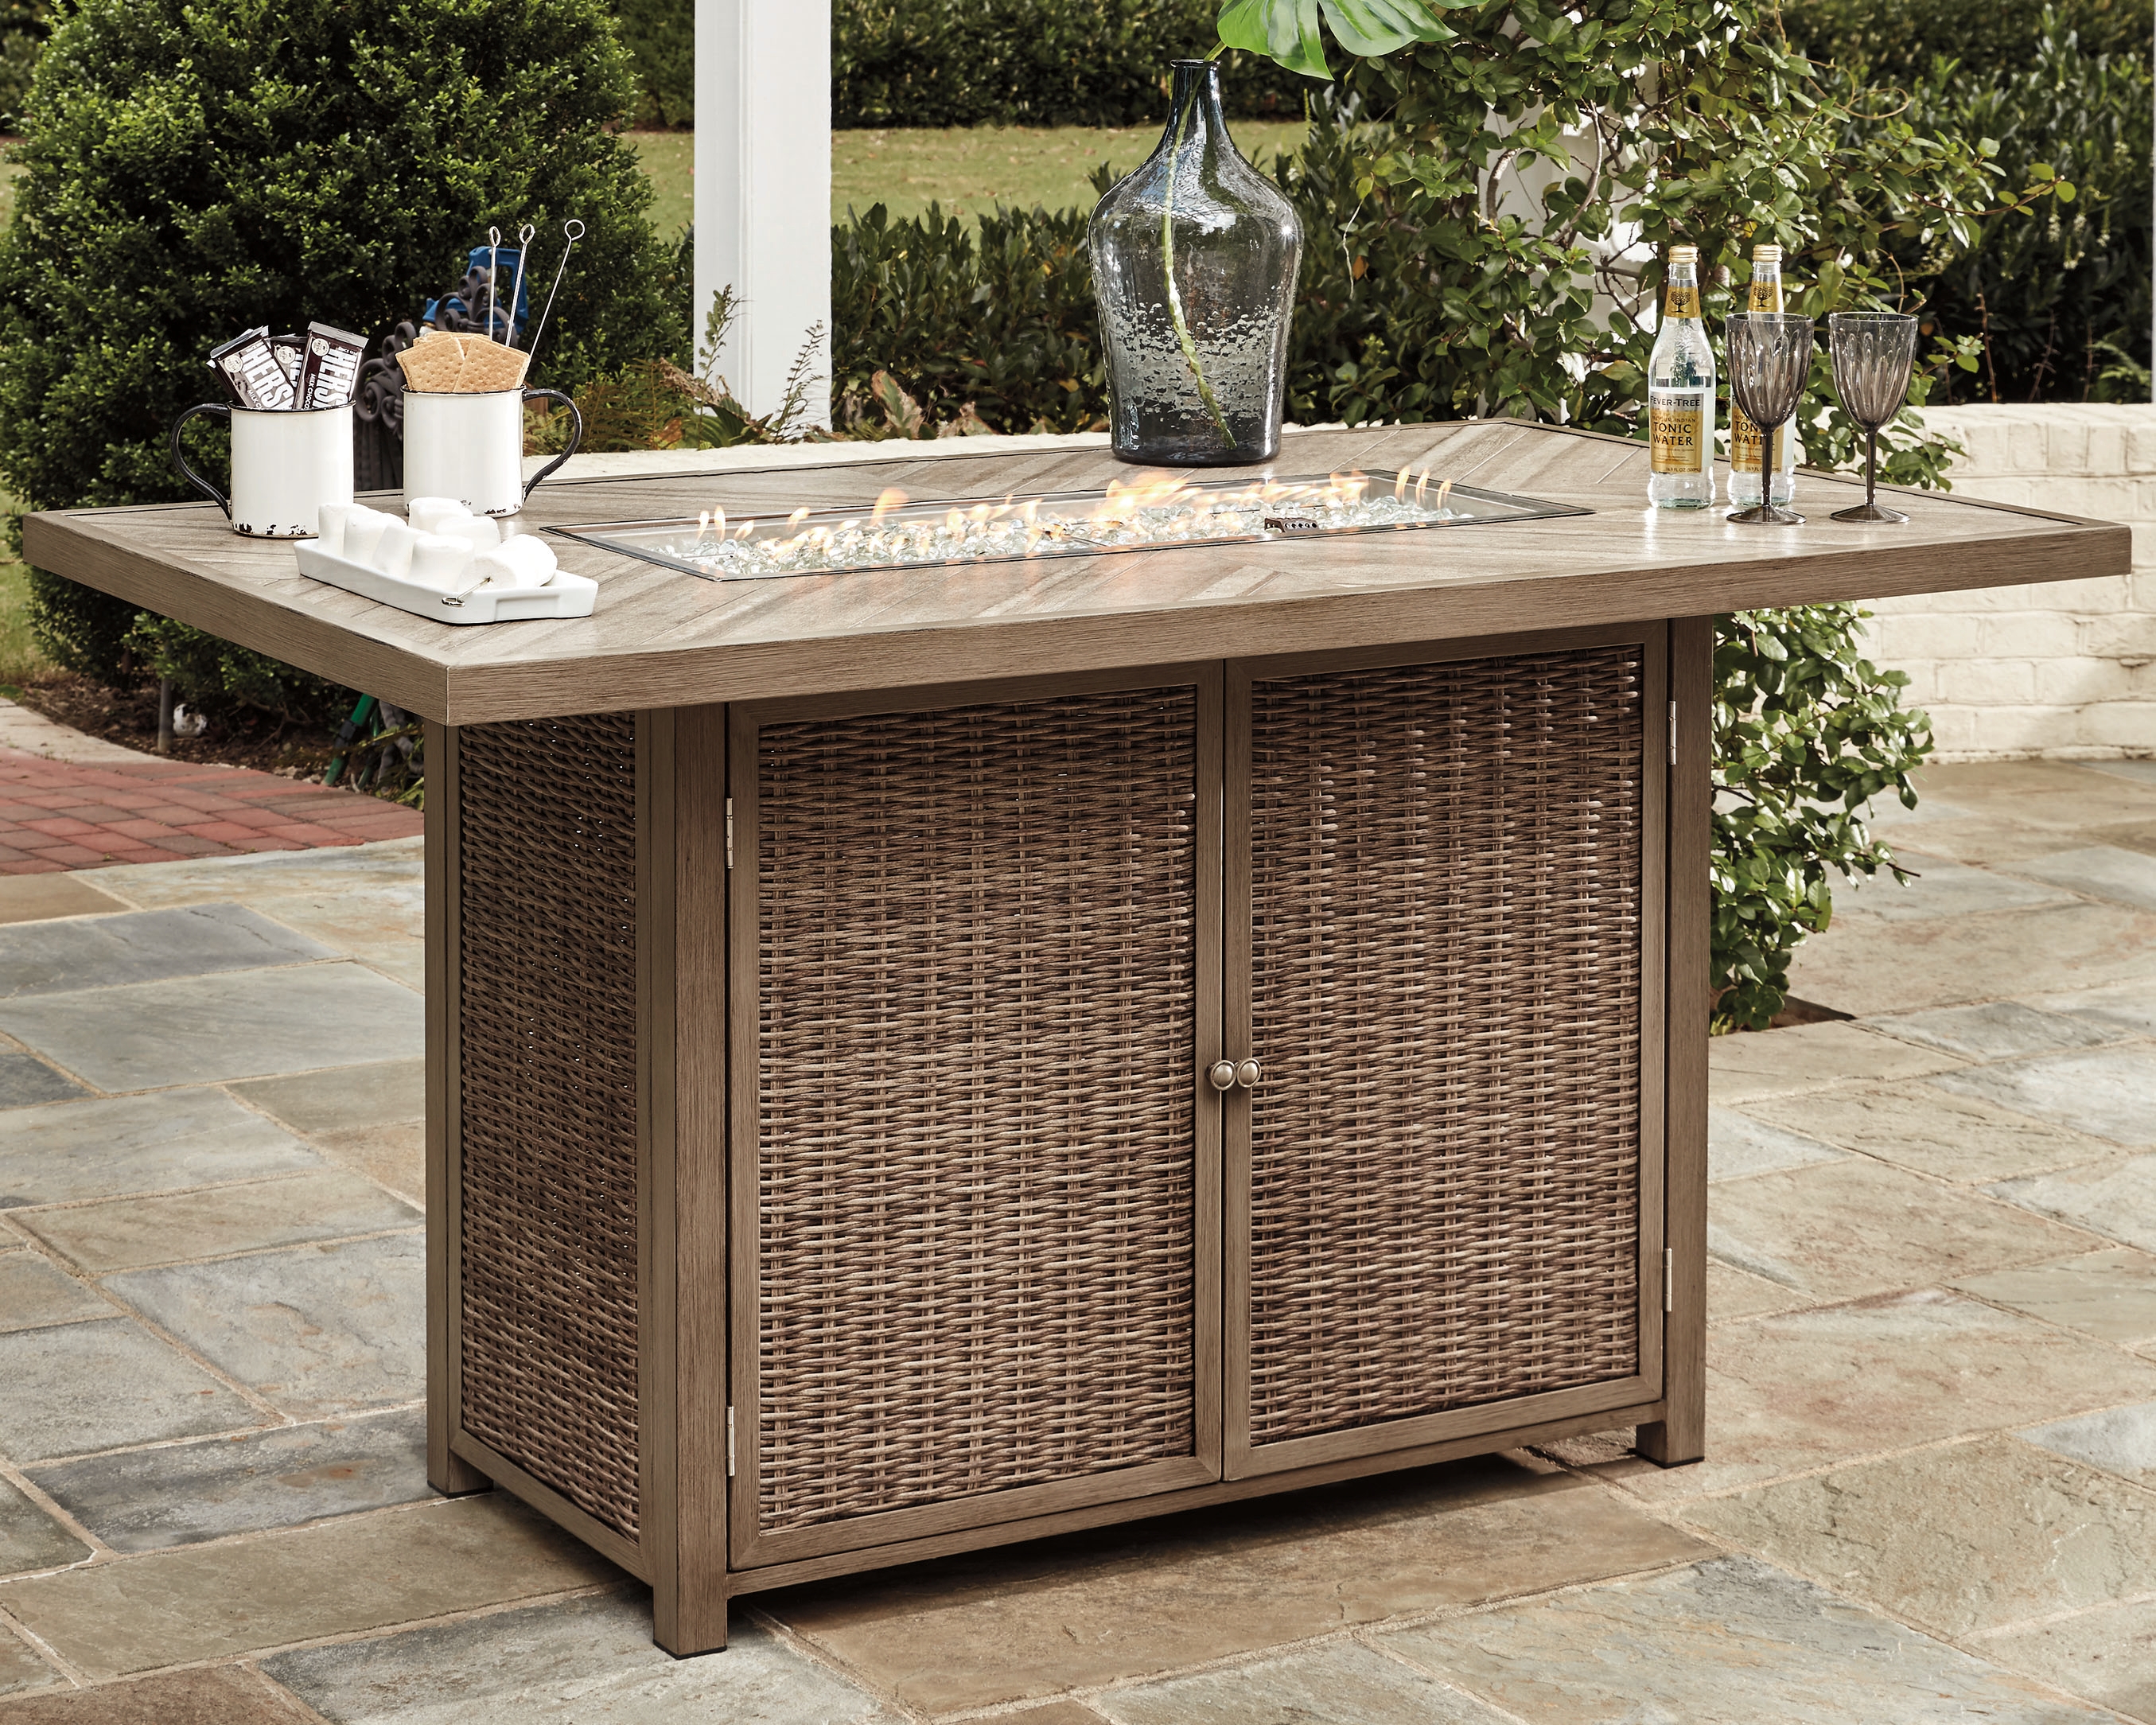 Beachcroft Bar Table With Fire Pit, Fire Pit Pub Table